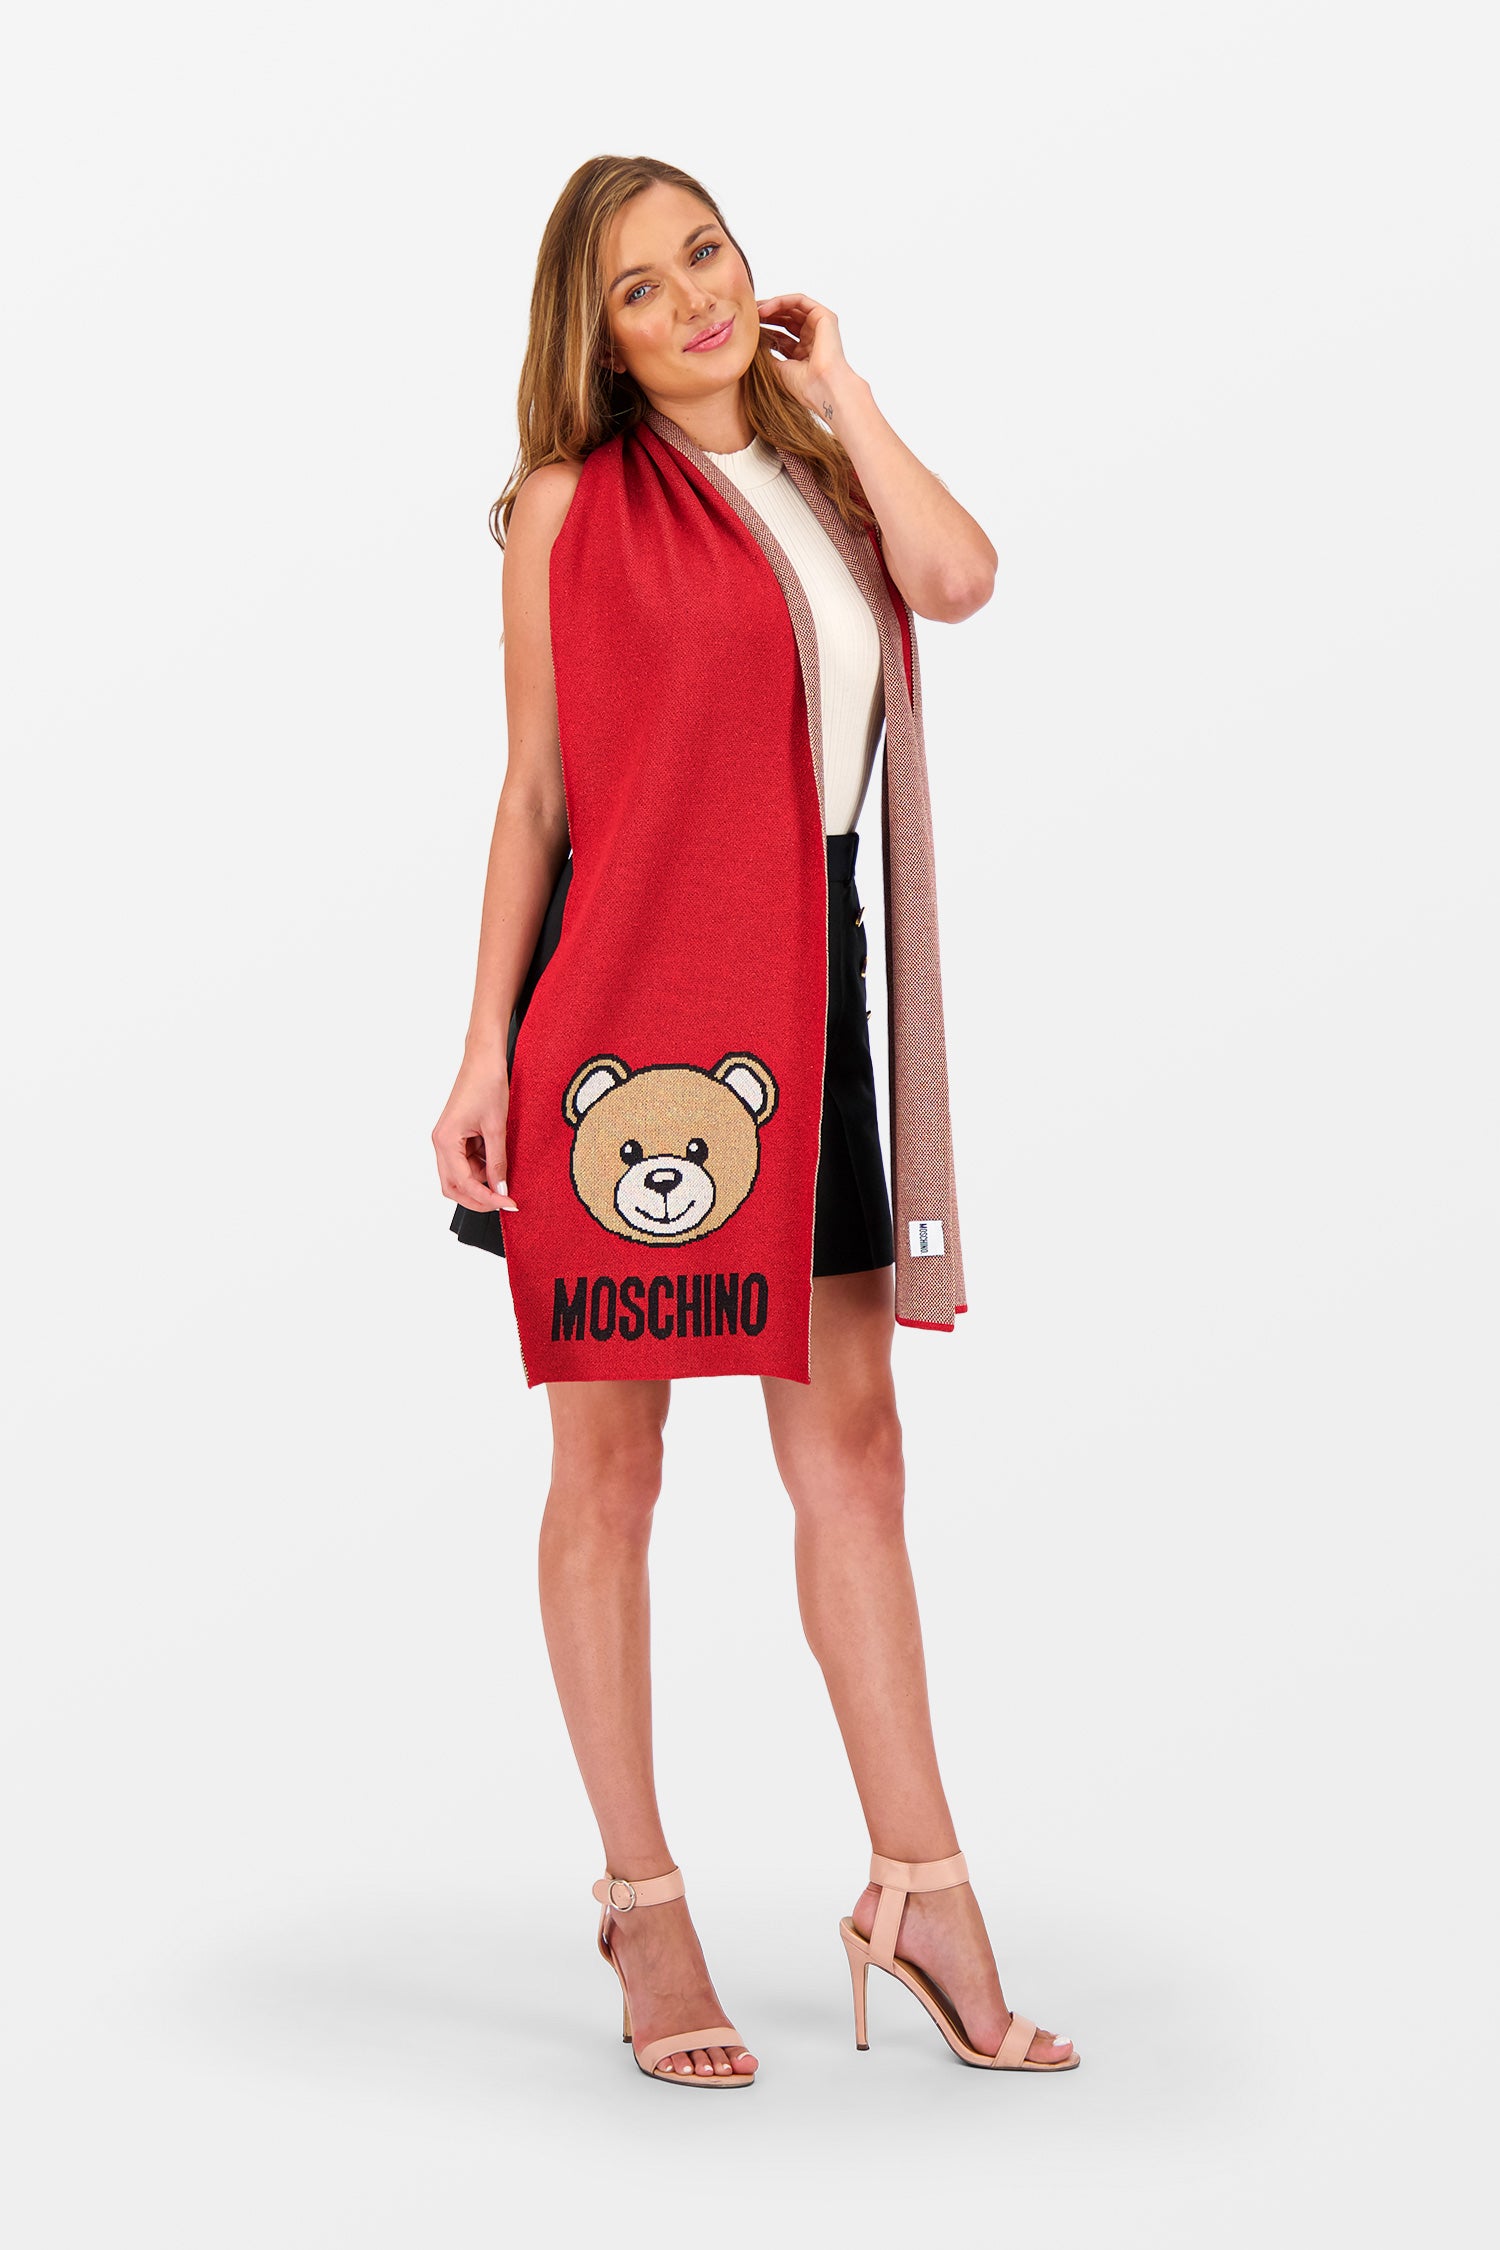 Buy Moschino Printed Scarf, Women, Red